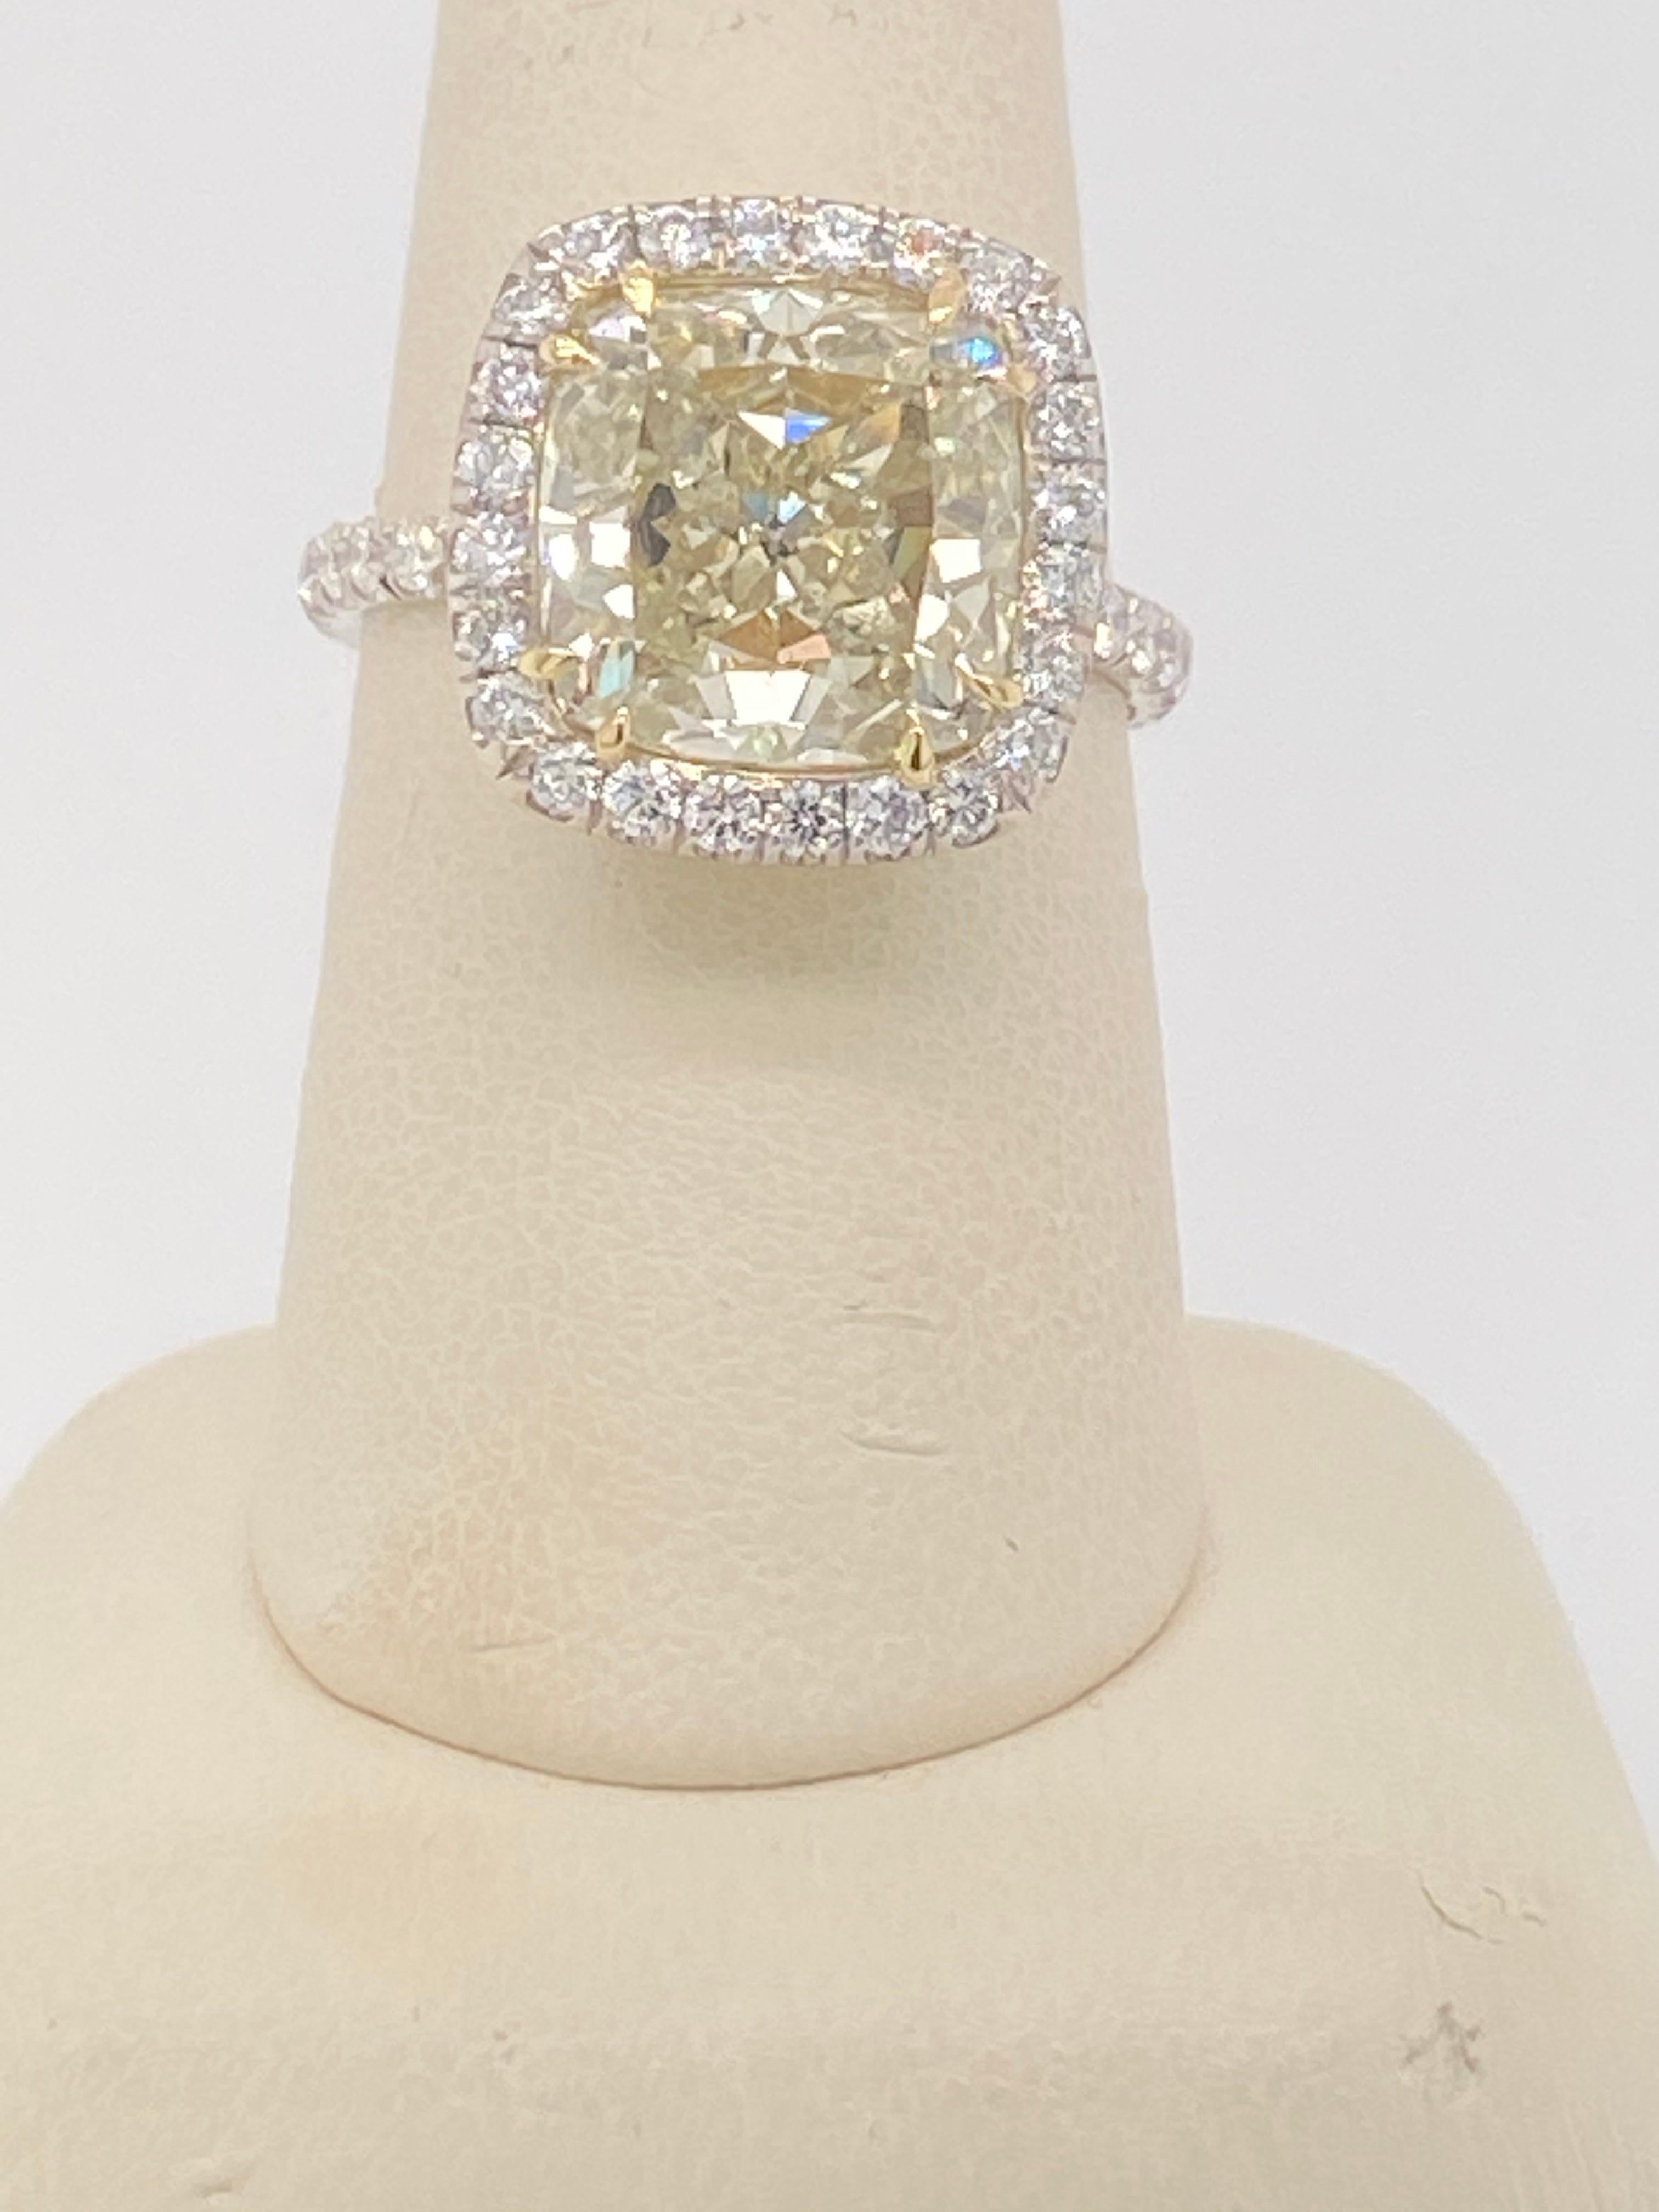 Show Stopping RING FOR SURE!  This 7.01 Cushion cut yellow diamond is set in 18k white gold and features a white diamond halo as well as diamonds down the sides of the shank.  This ring is sure to get her to say yes and sure to make your day